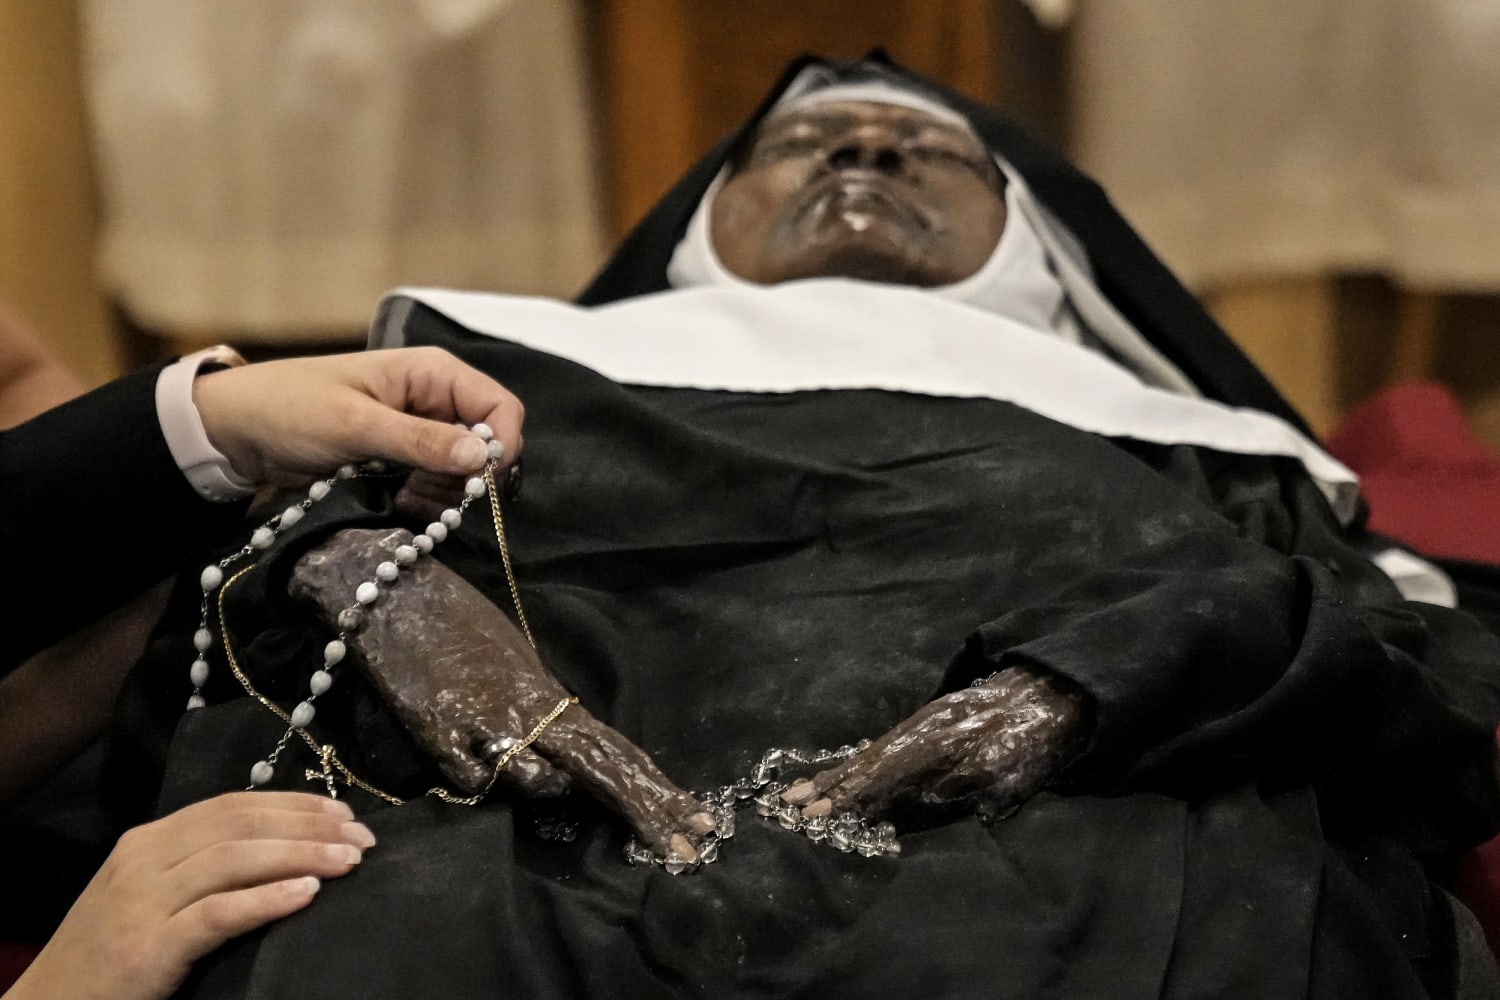 Nun whose body shows little decay since 2019 death draws hundreds to rural Missouri